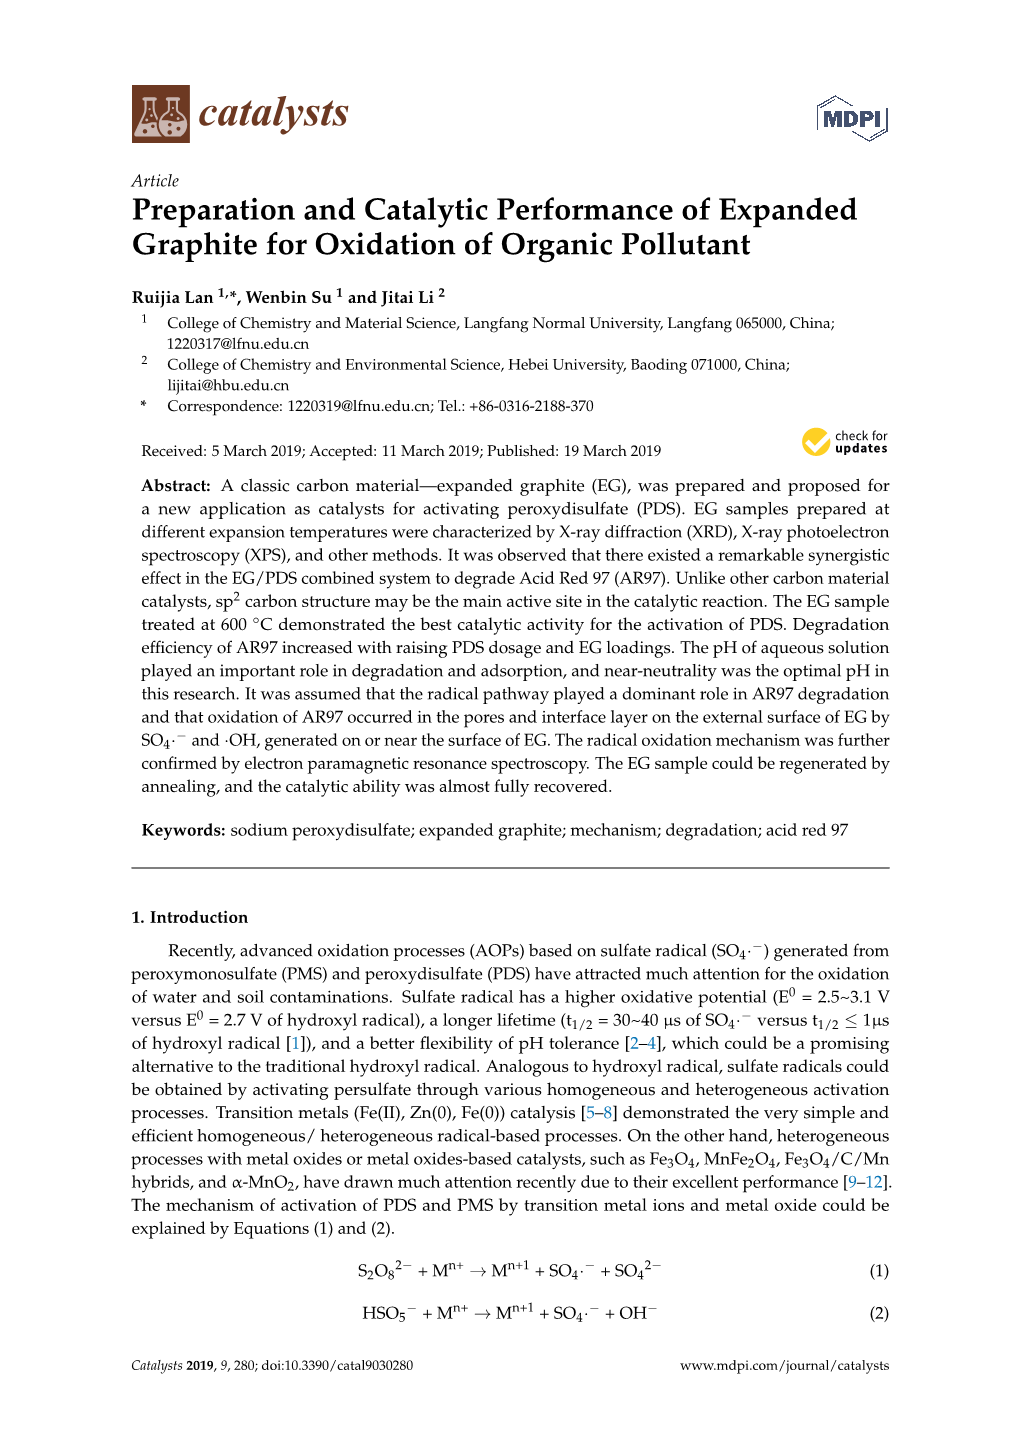 Preparation and Catalytic Performance of Expanded Graphite for Oxidation of Organic Pollutant